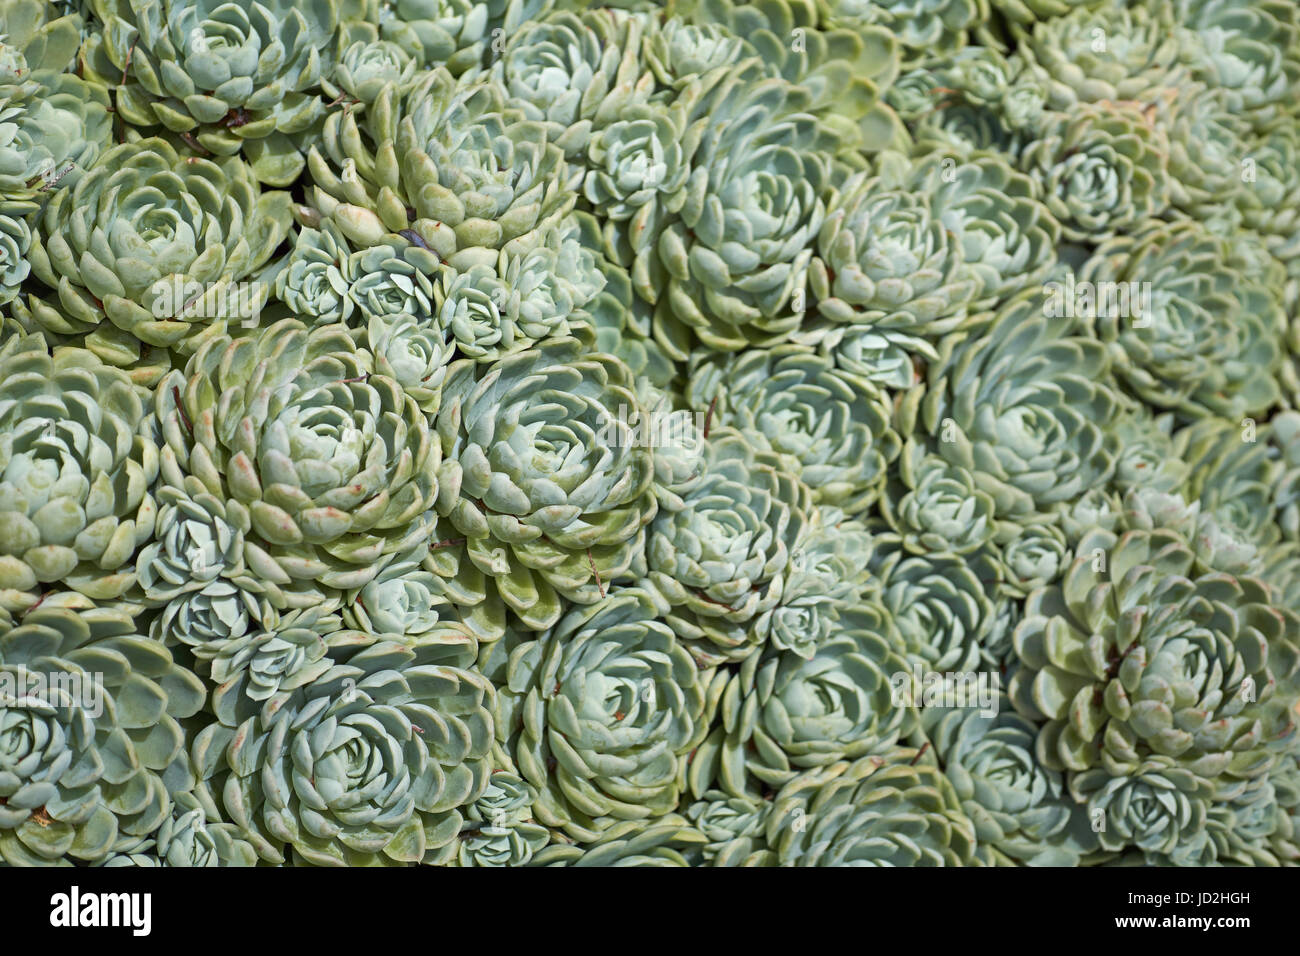 Dense ground cover of Echeveria elegans succulent plants - also Mexican Snowball or White Mexican Rose Stock Photo